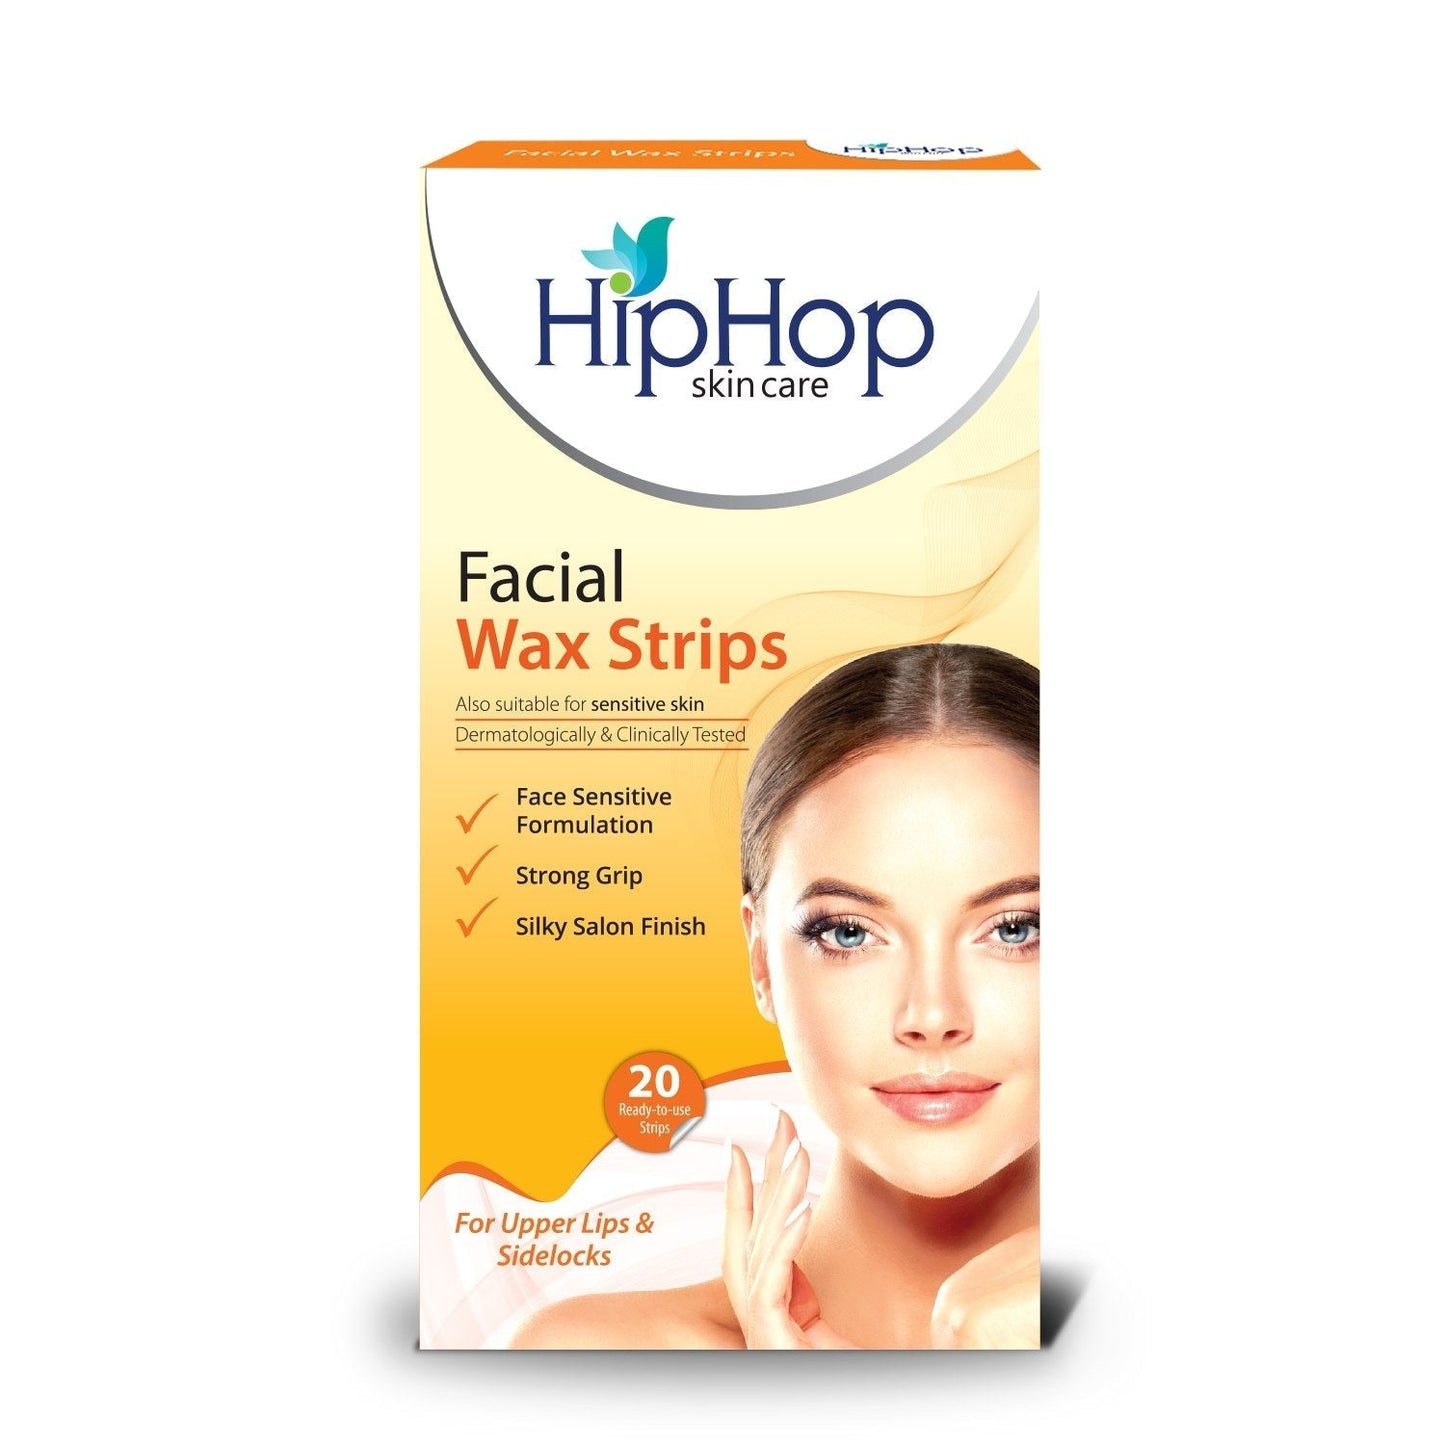 HipHop Facial Wax Strips (Argan Oil, 20 Strips) + Skin Tightening Cream (Pomegranate Extract, 100 gm)